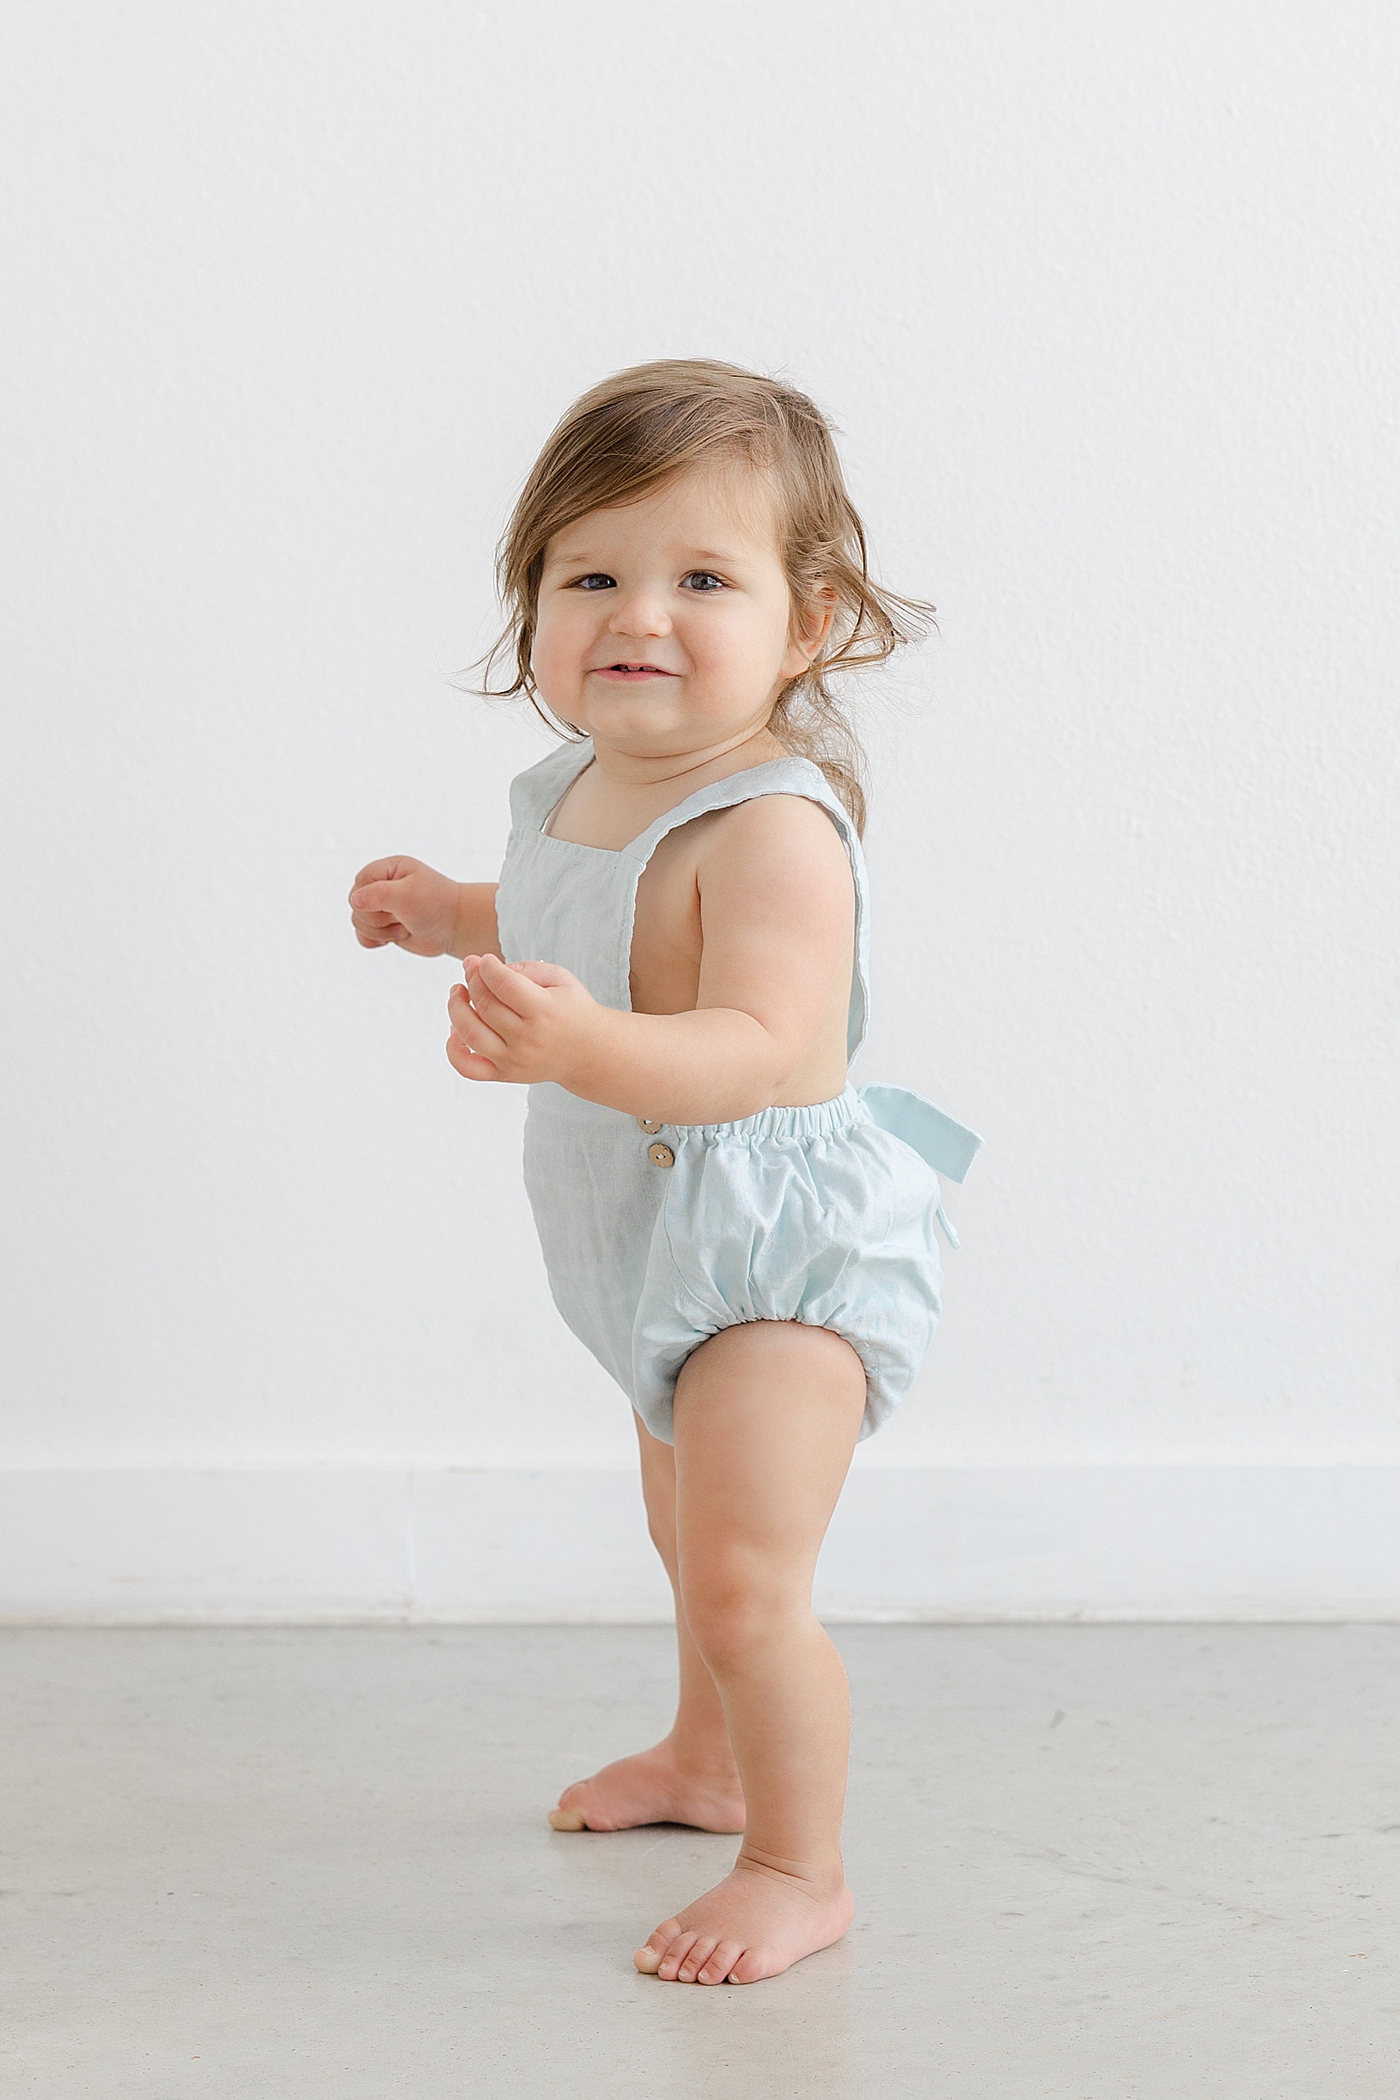 Baby girl in a light blue romper standing | Photo by Sana Ahmed Photography